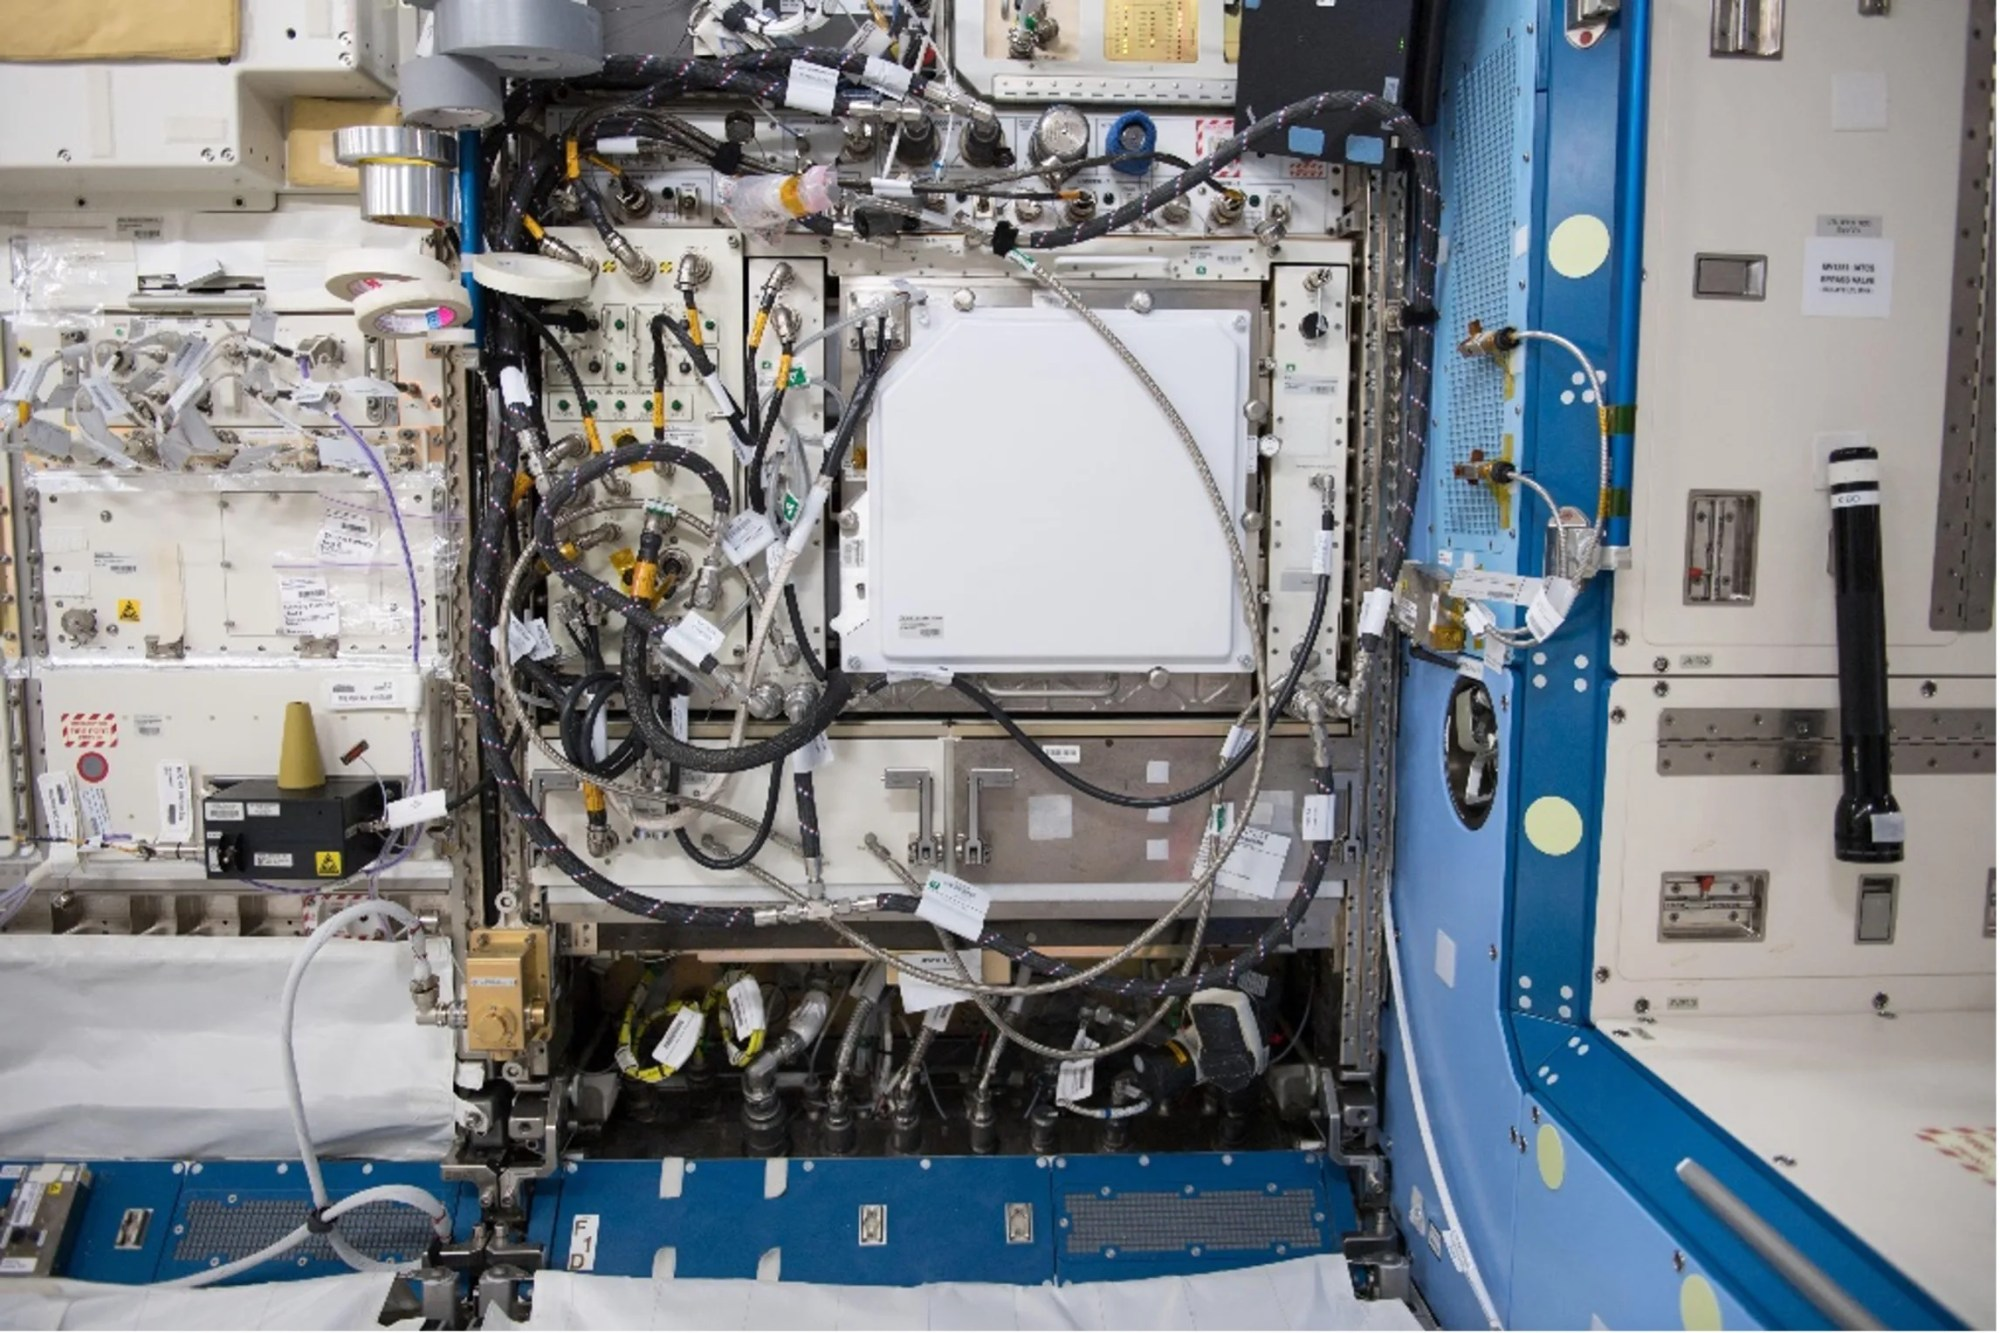 A complex metal box is set into the inside wall of the space station. Black and silver wires and tubes crisscross the front surface of the box, connecting the environmental control system in the left half of the box to the plant growth chamber in the right half.